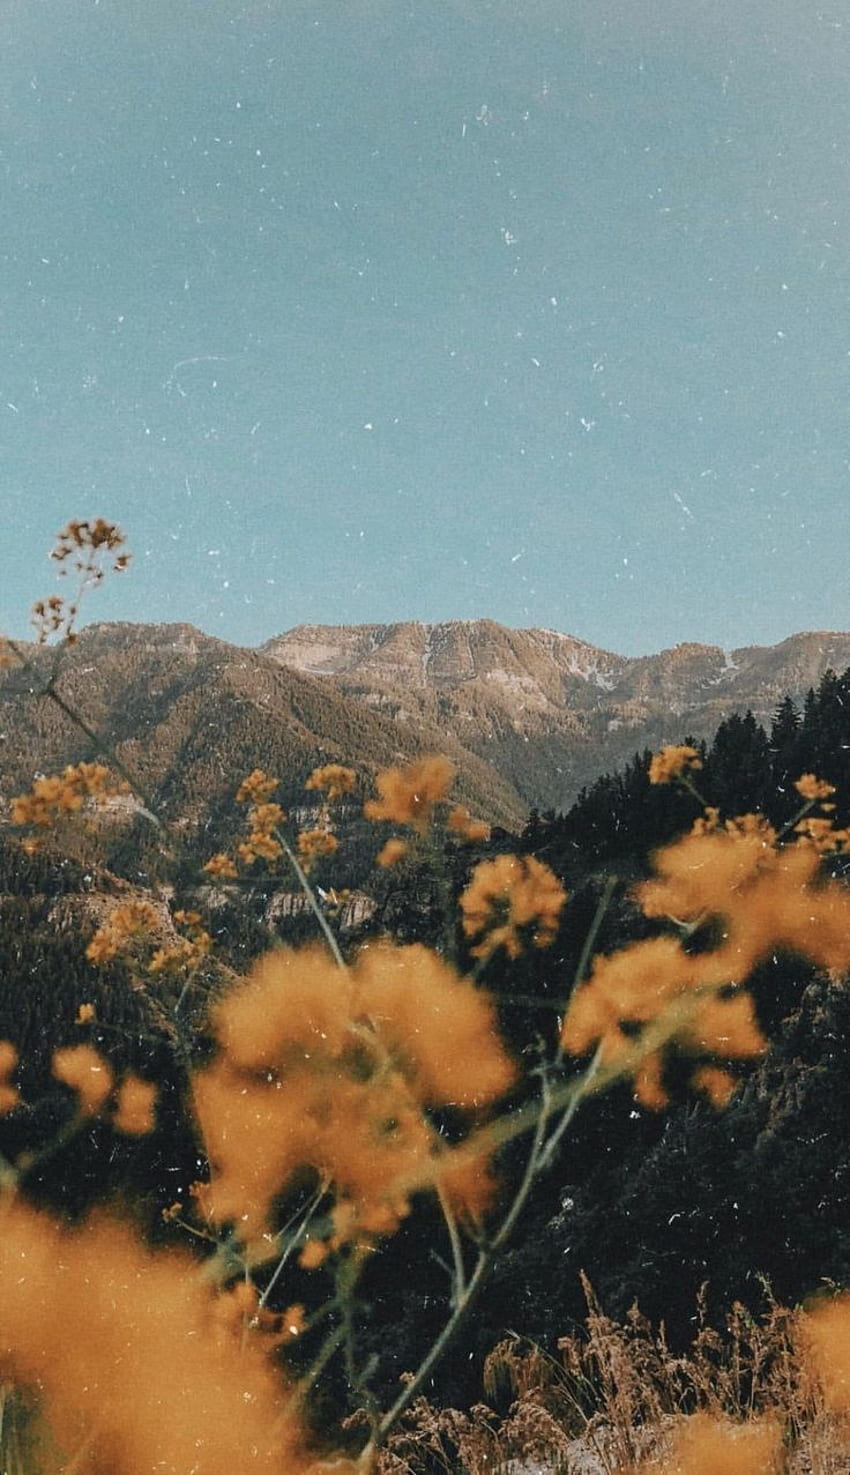 Vintage Aesthetics. Film graphy. Film filter. Flowers. Landscape graphy. Mountains - HD phone wallpaper